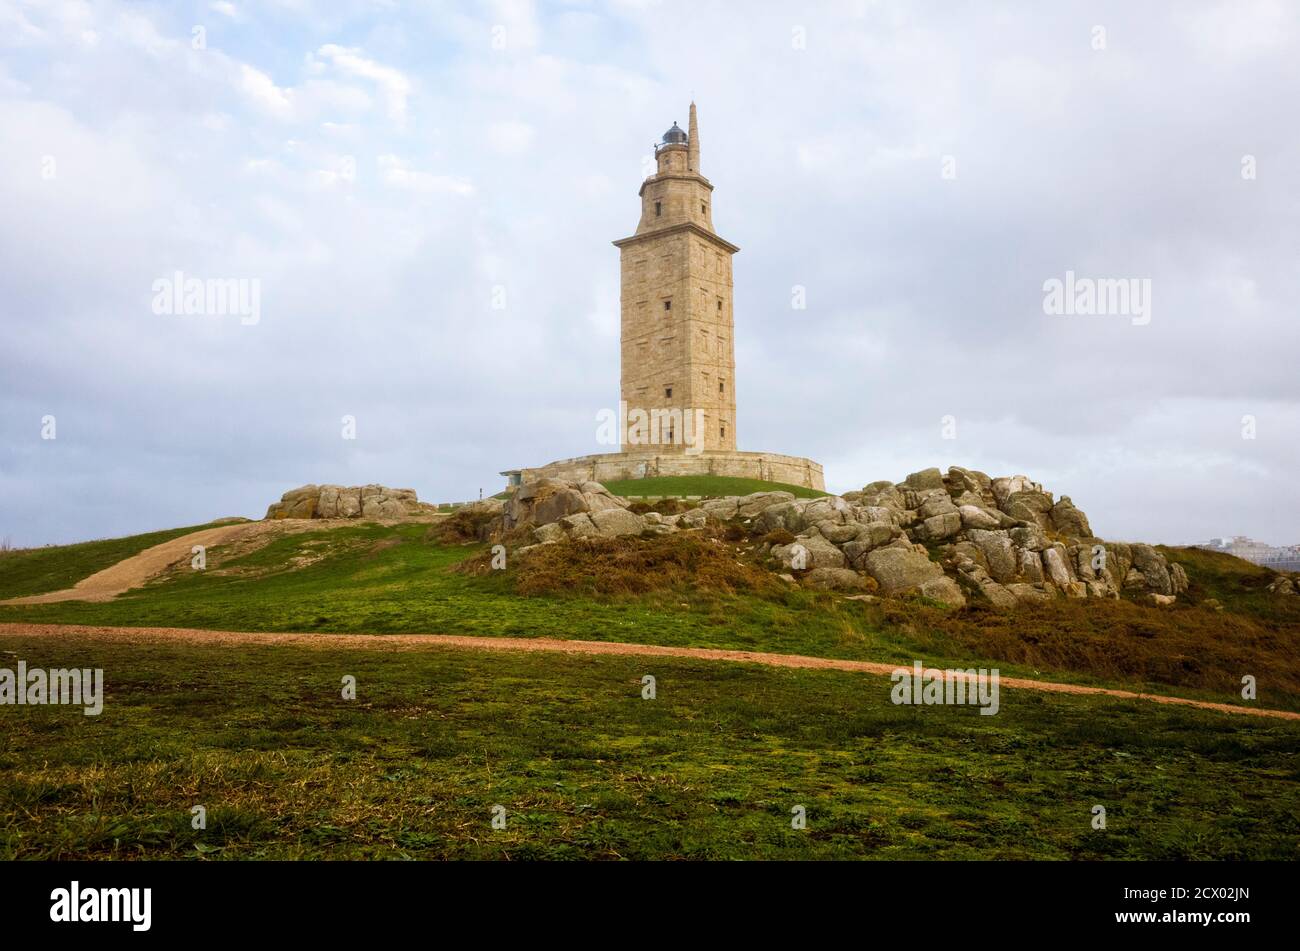 A Coruna, Galicia, Spain - February 10th, 2020 : Tower of Hercules Roman lighthouse. Built in the 2nd century and renovated in 1791, it is the oldest Stock Photo